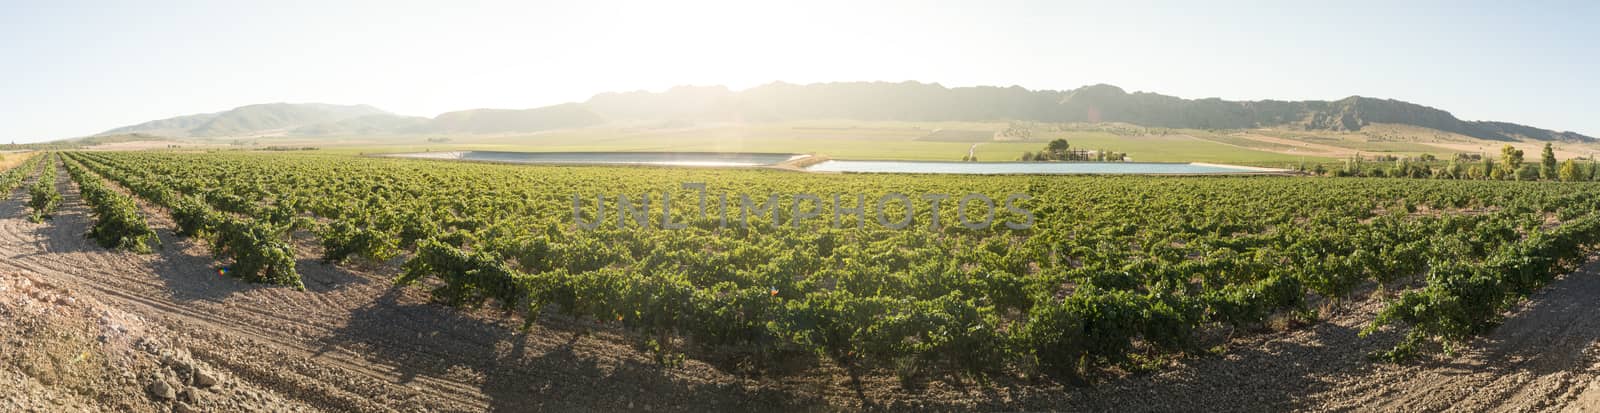 Vineyards at sunset and irrigation canal.